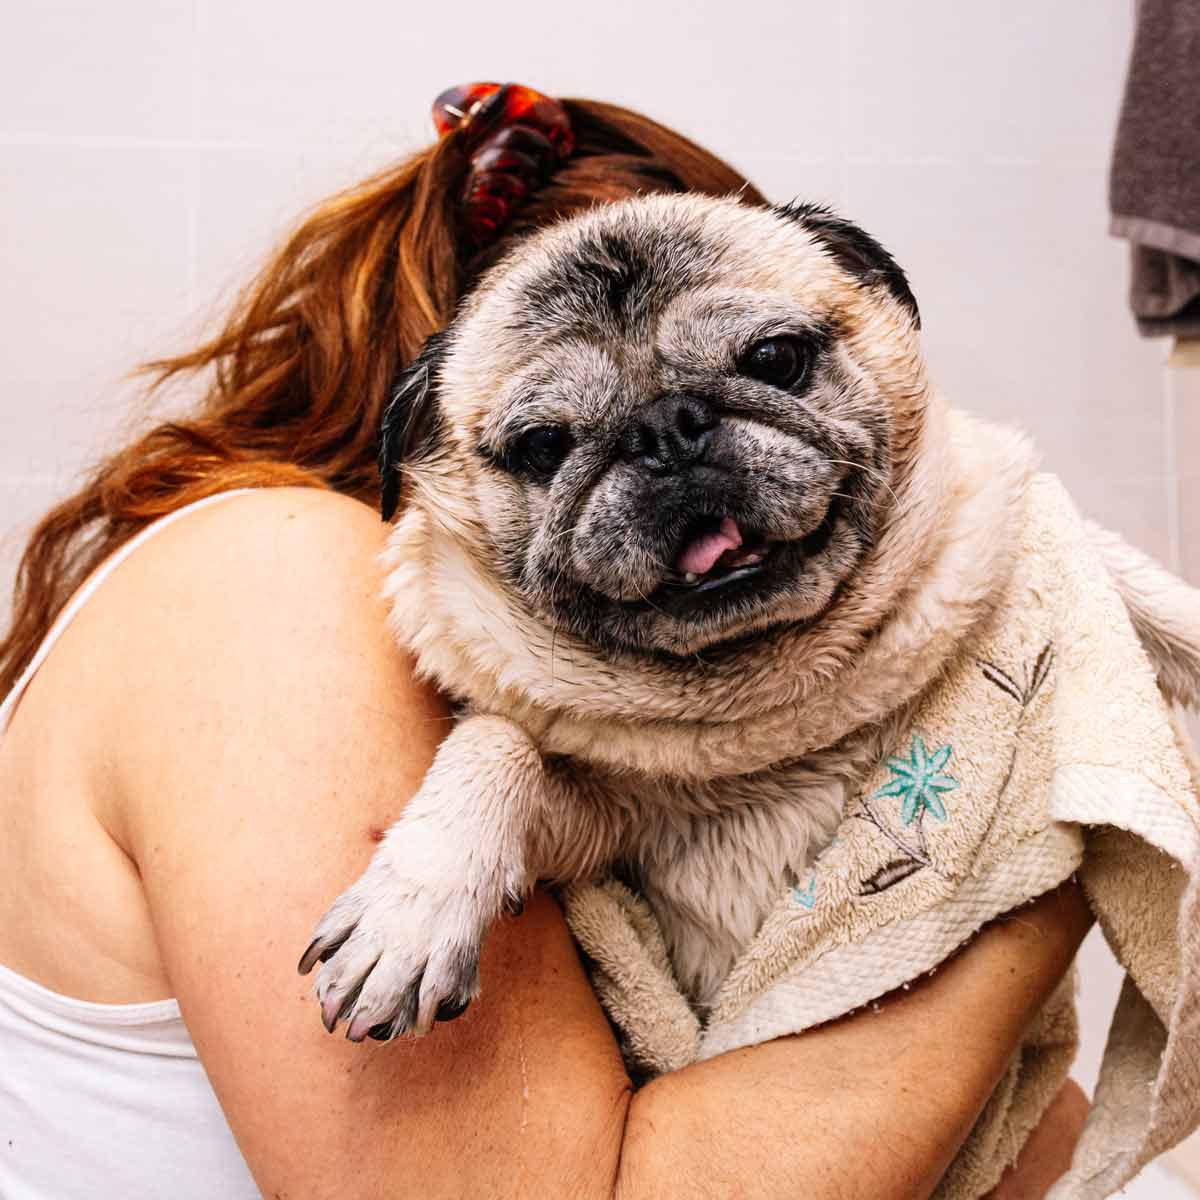 pug smiling with cuddles after a bath